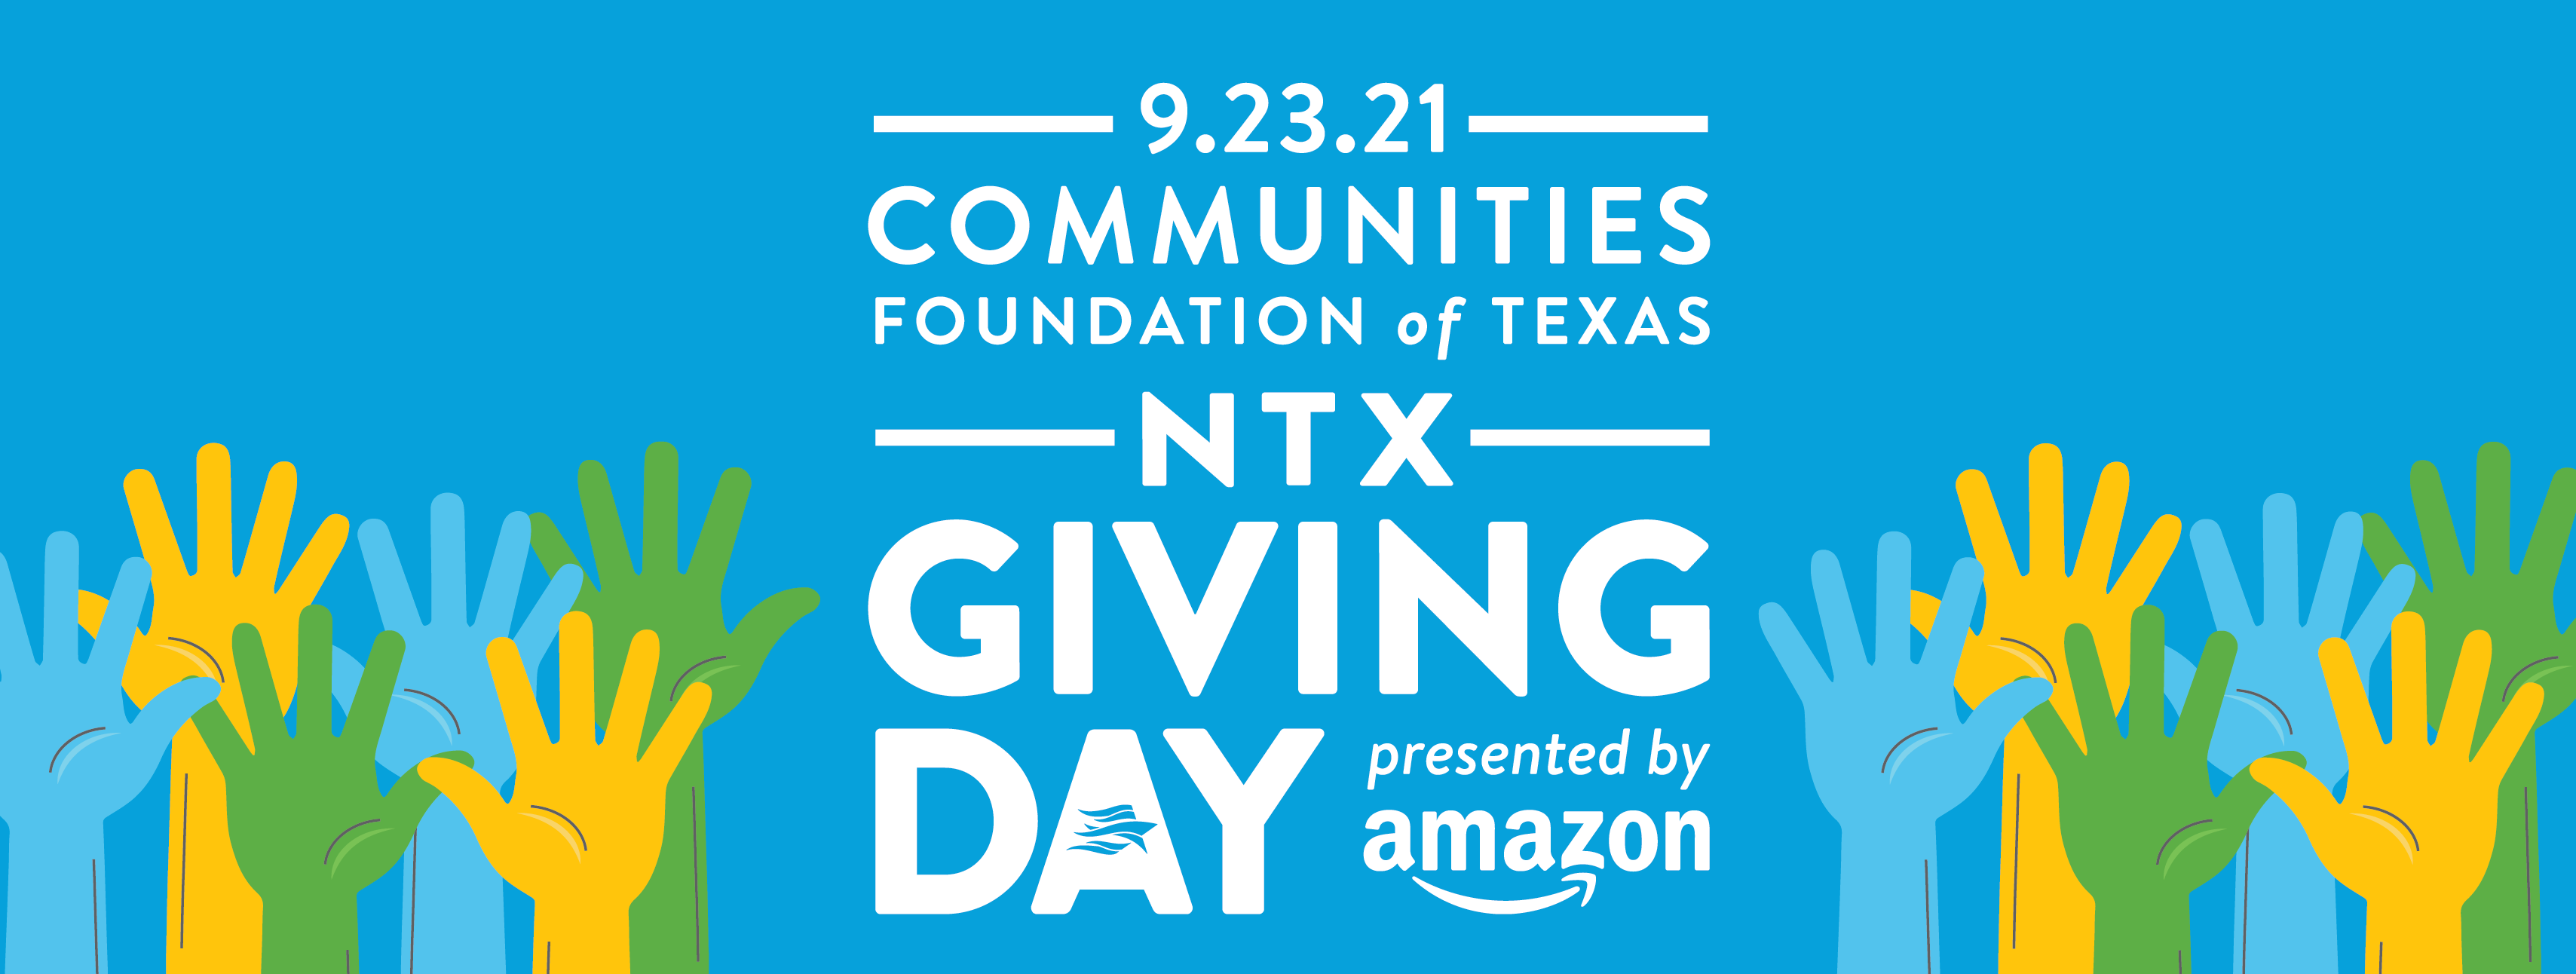 2020 North Texas Giving Day